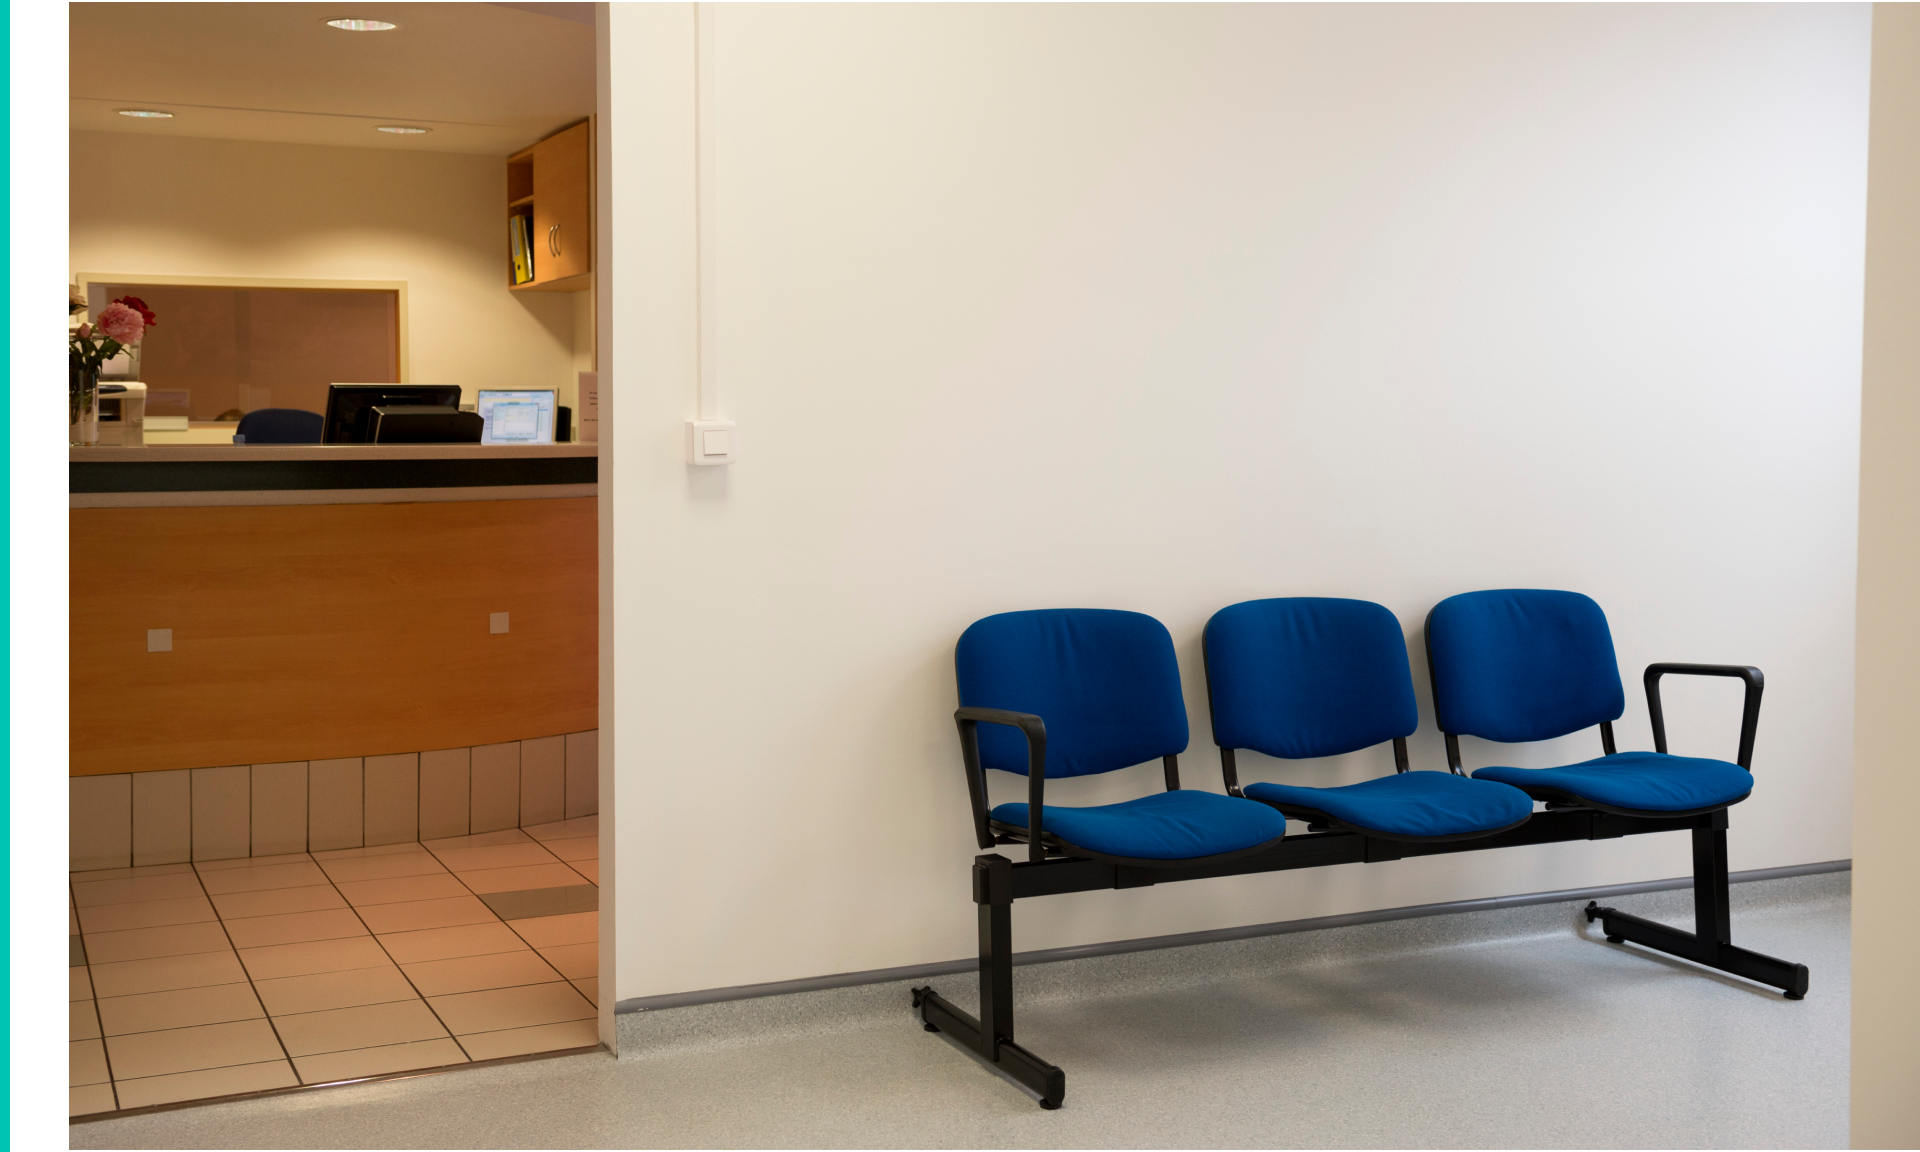 Waiting bench outside of doctor's office in hospital 